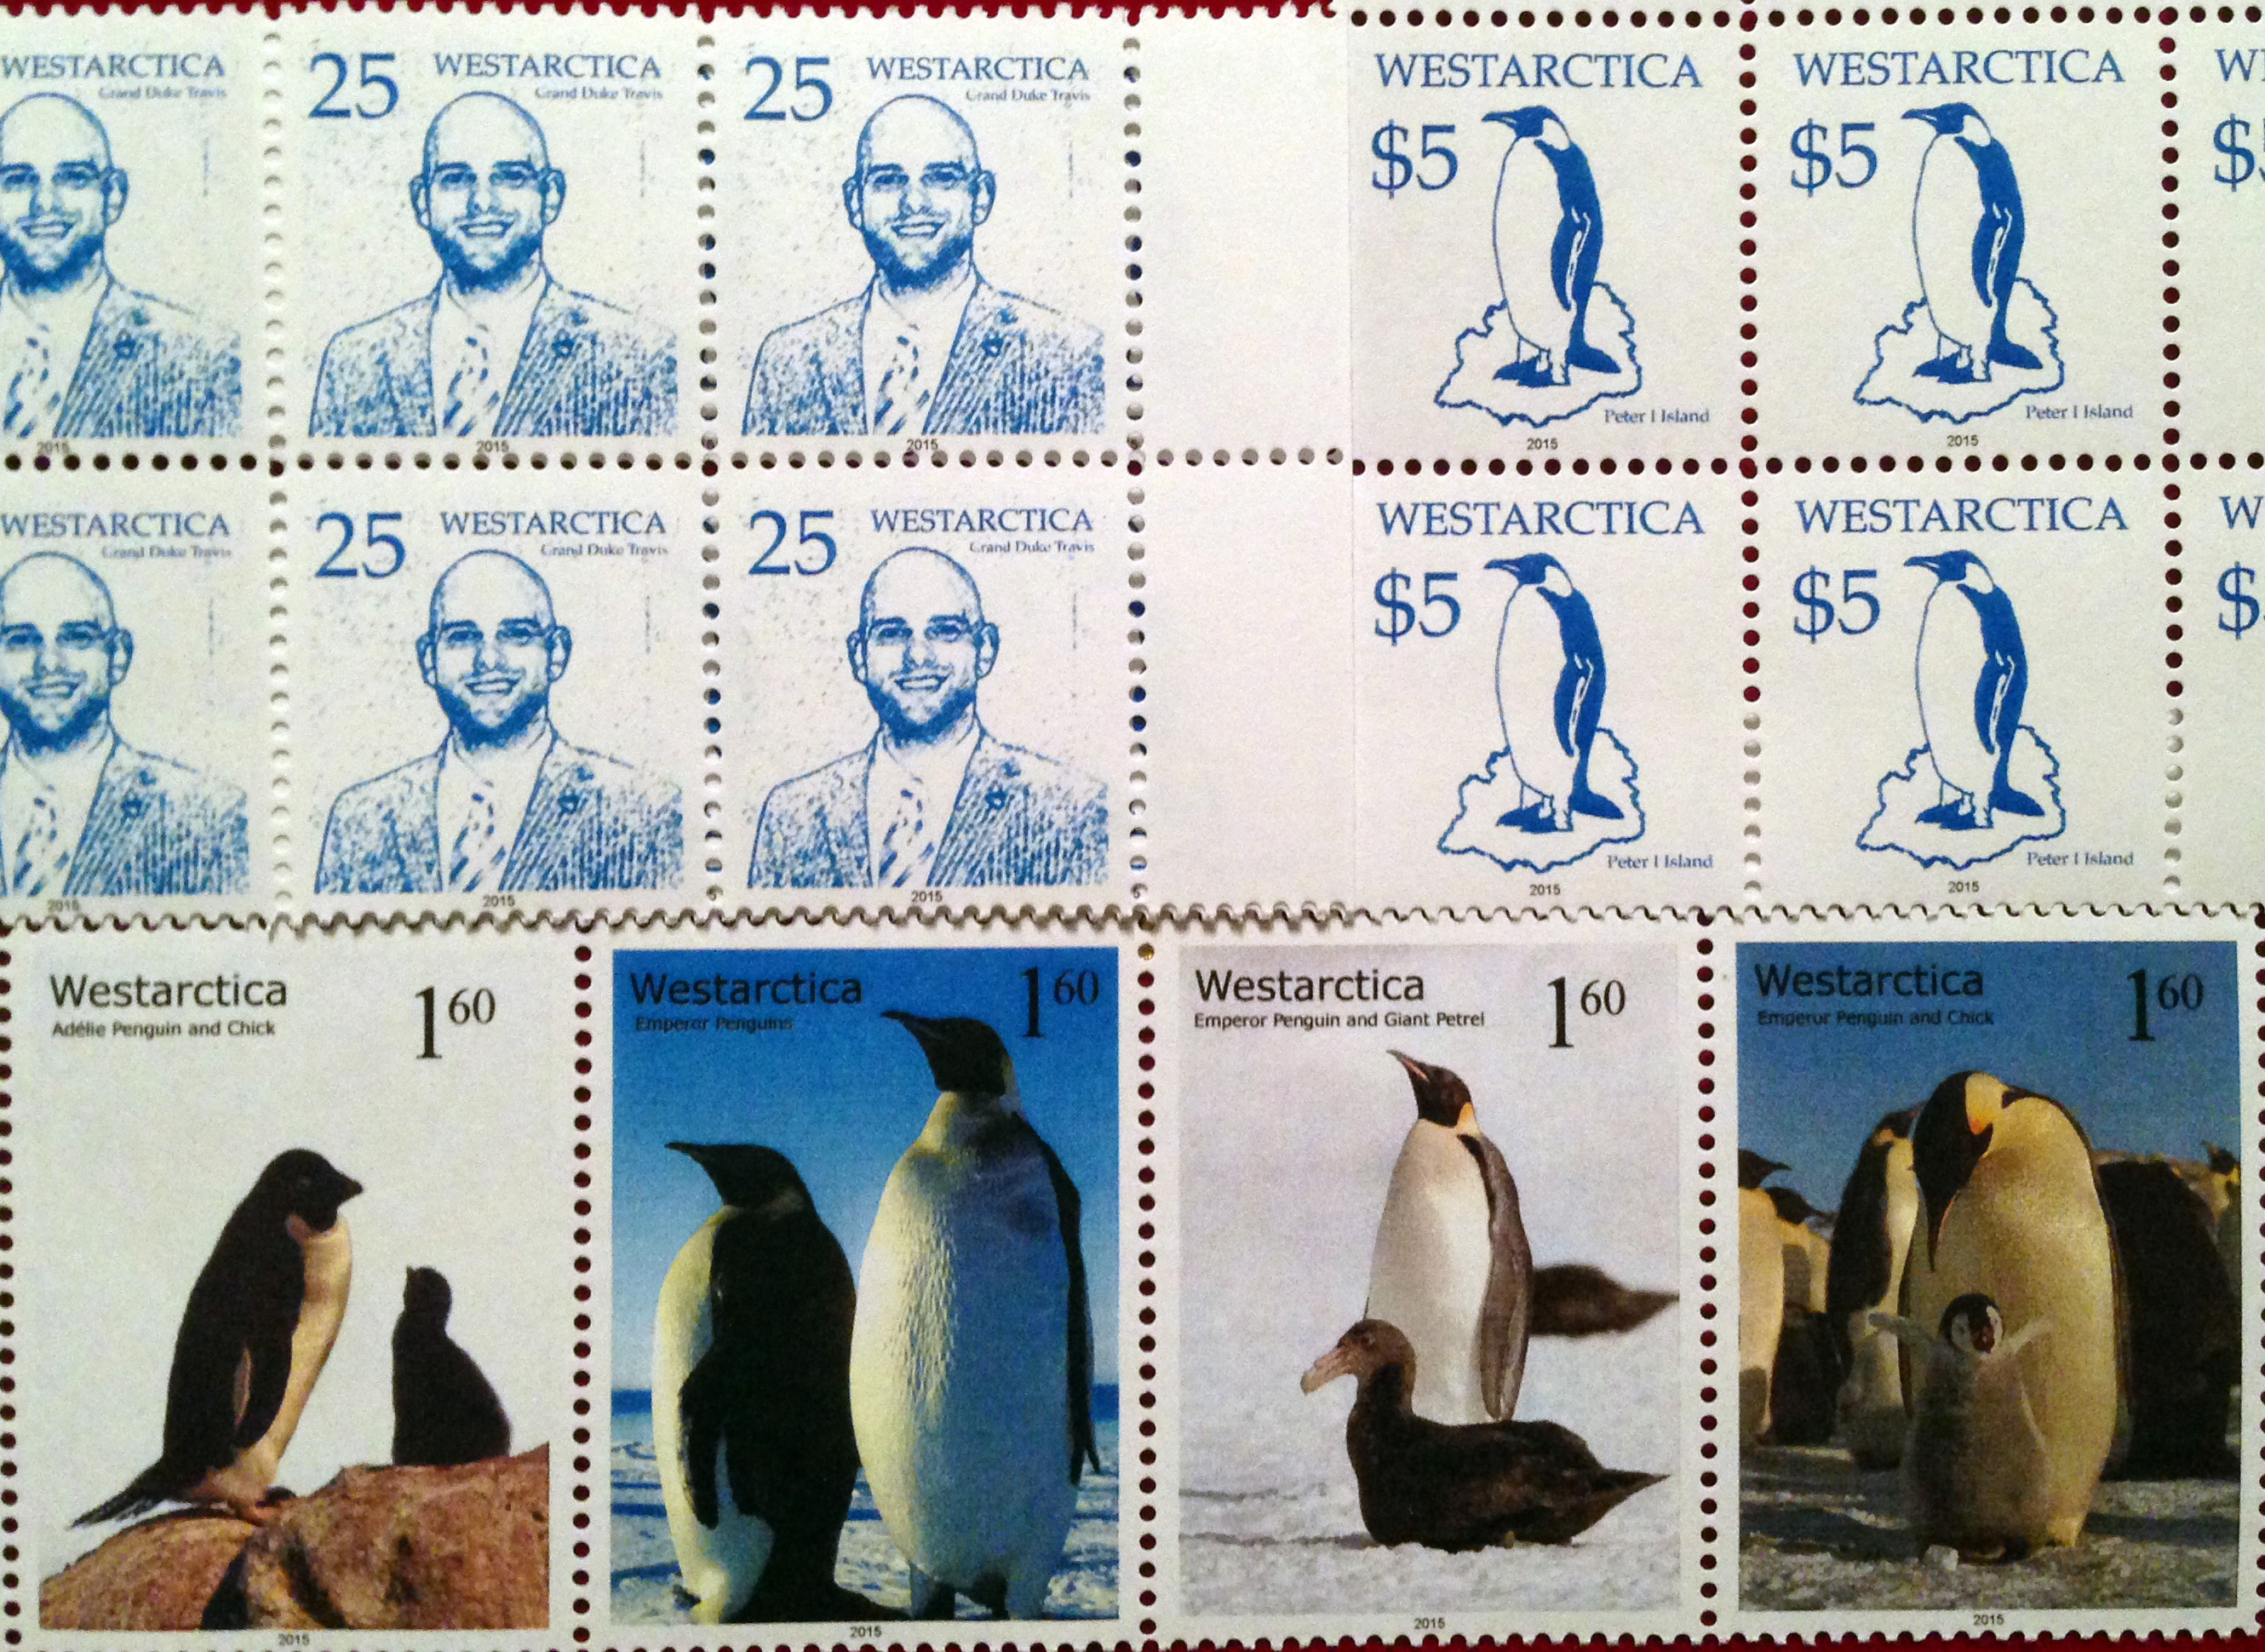 2015 Stamp Collection.jpg